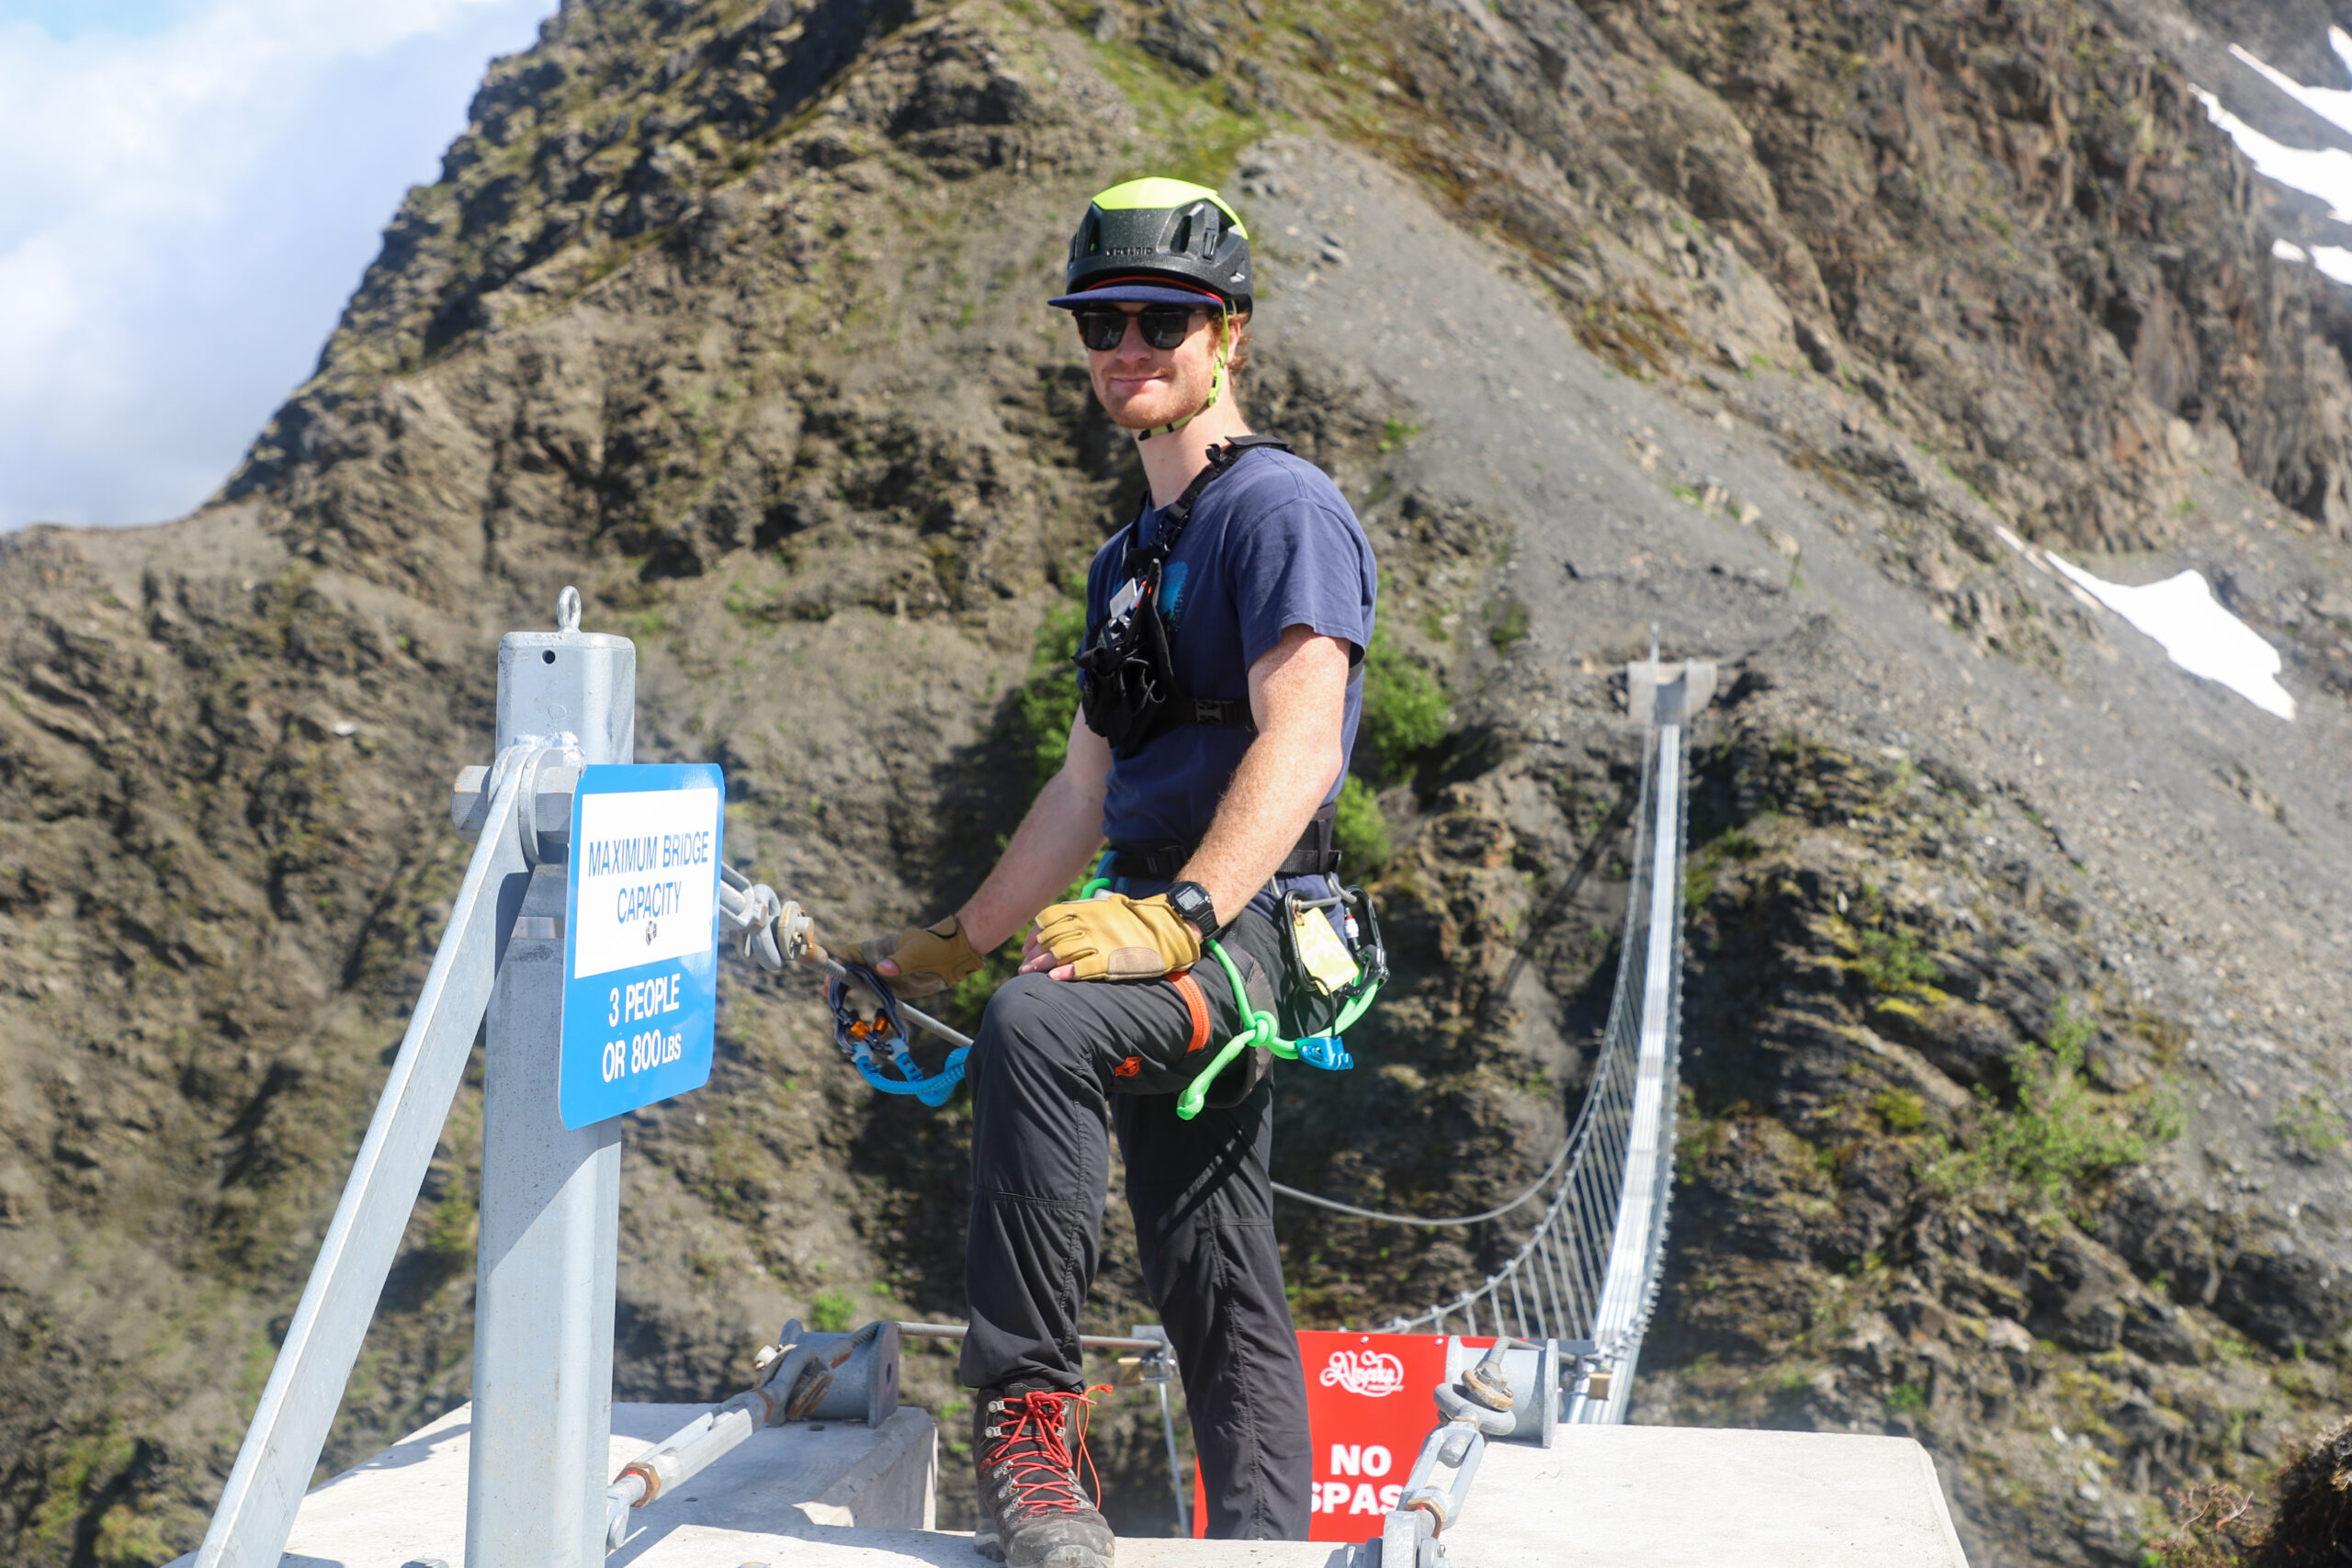 a person with a helmet and climbing harness waiting at the end of a long suspension bridge across a mountainside.